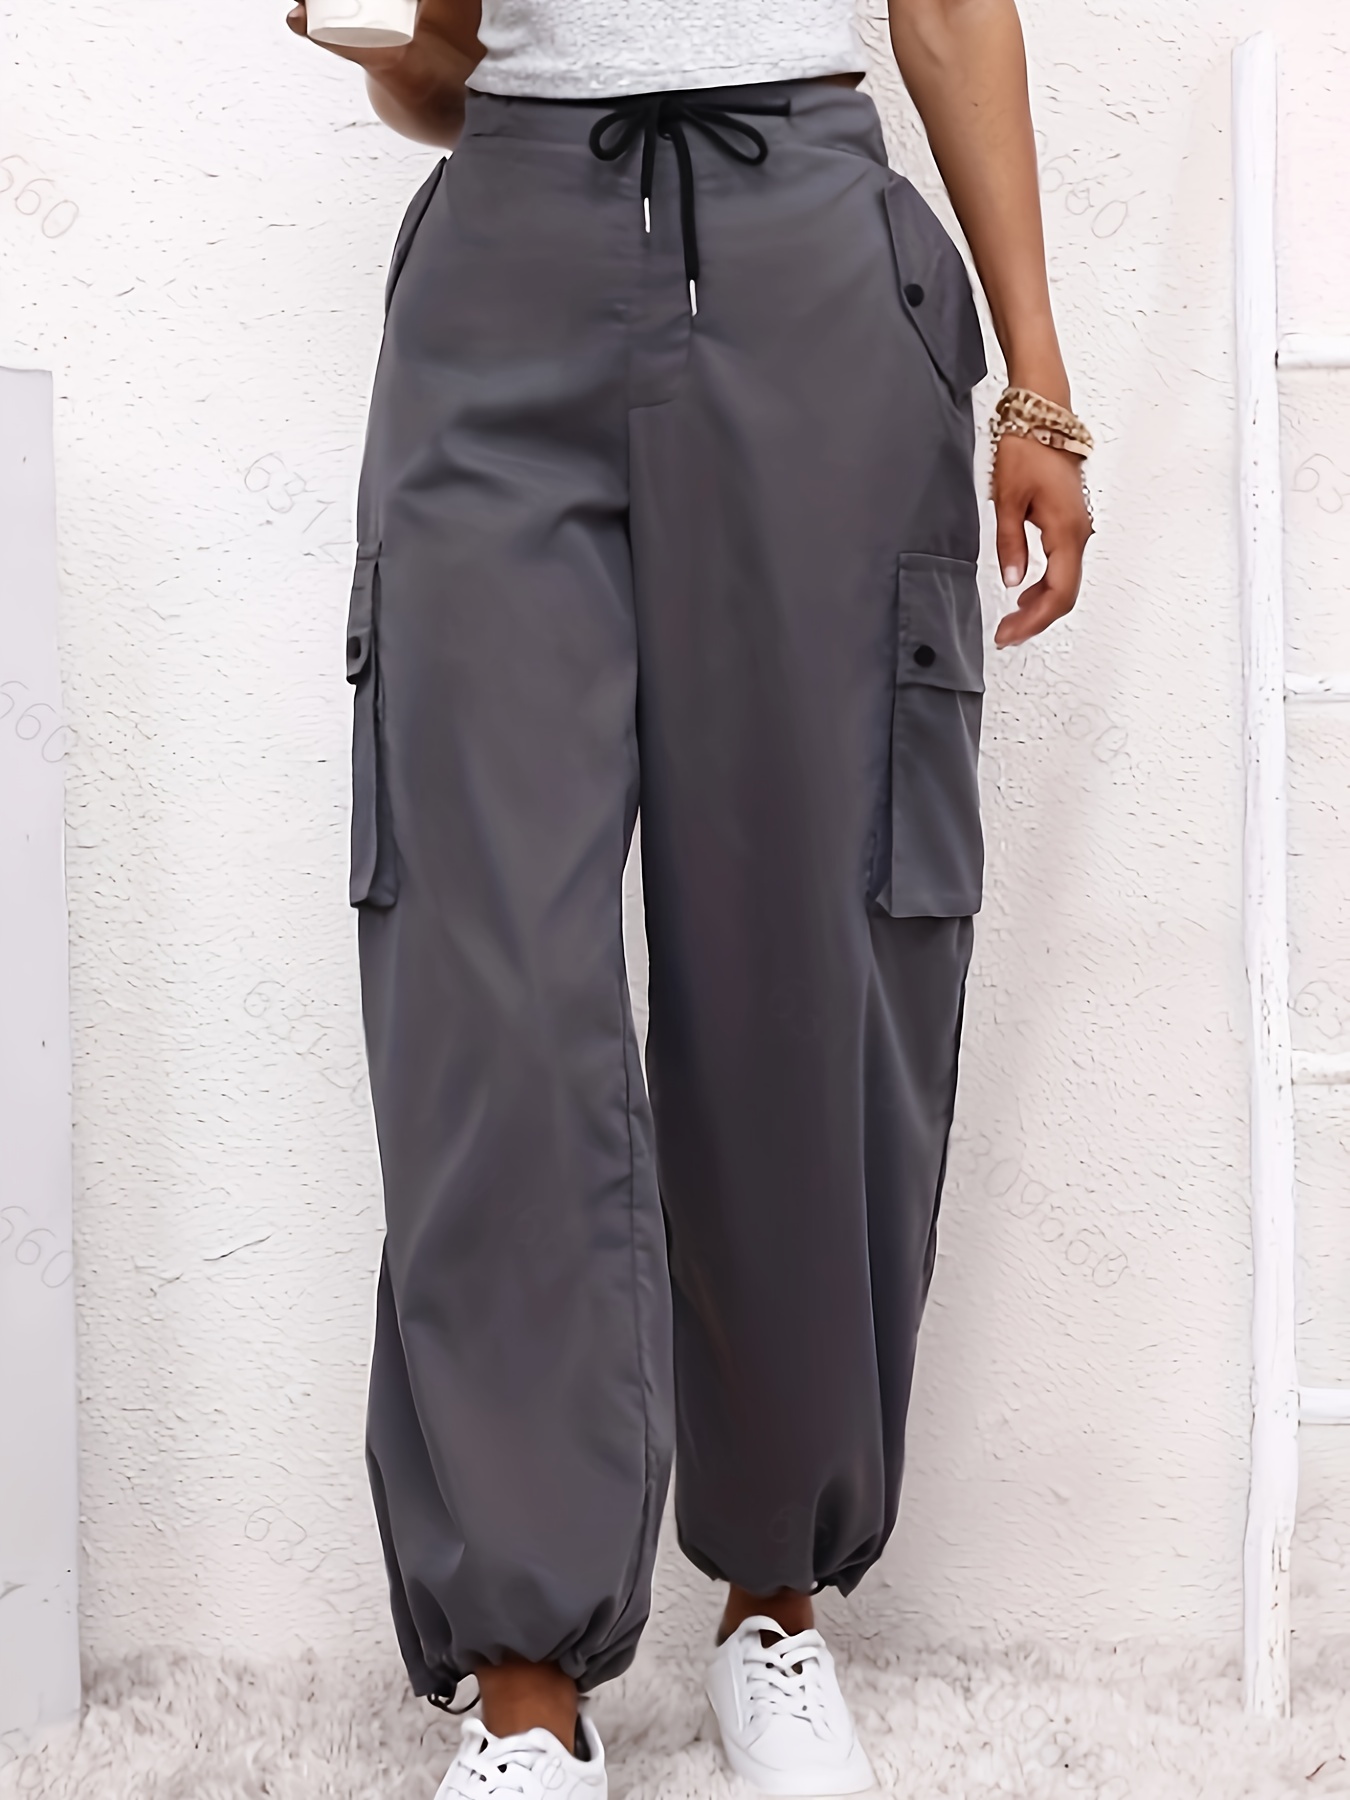 Women's Cargo Pants Pants Trousers Baggy Cuffed Cargo Drawstring Baggy  Multiple Pockets Plain Comfort Full Length Casual Weekend Fashion Black  Green Mid Waist Micro-elastic 2024 - $26.99